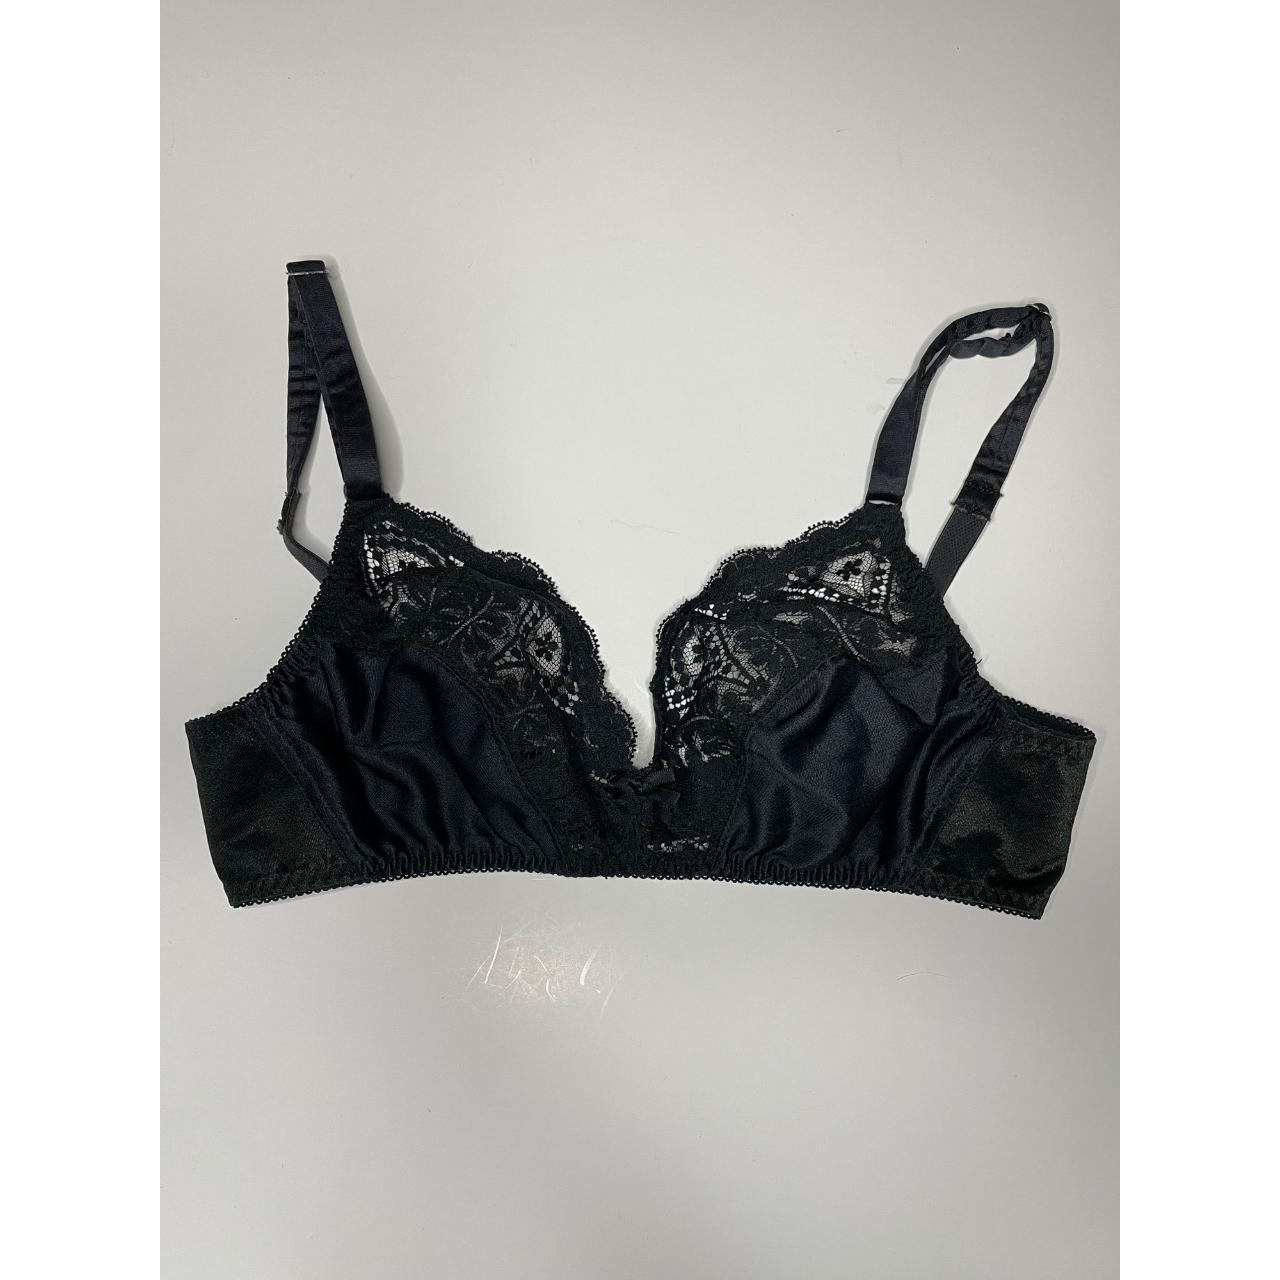 Black lace and silk bra top. No brand or size tag